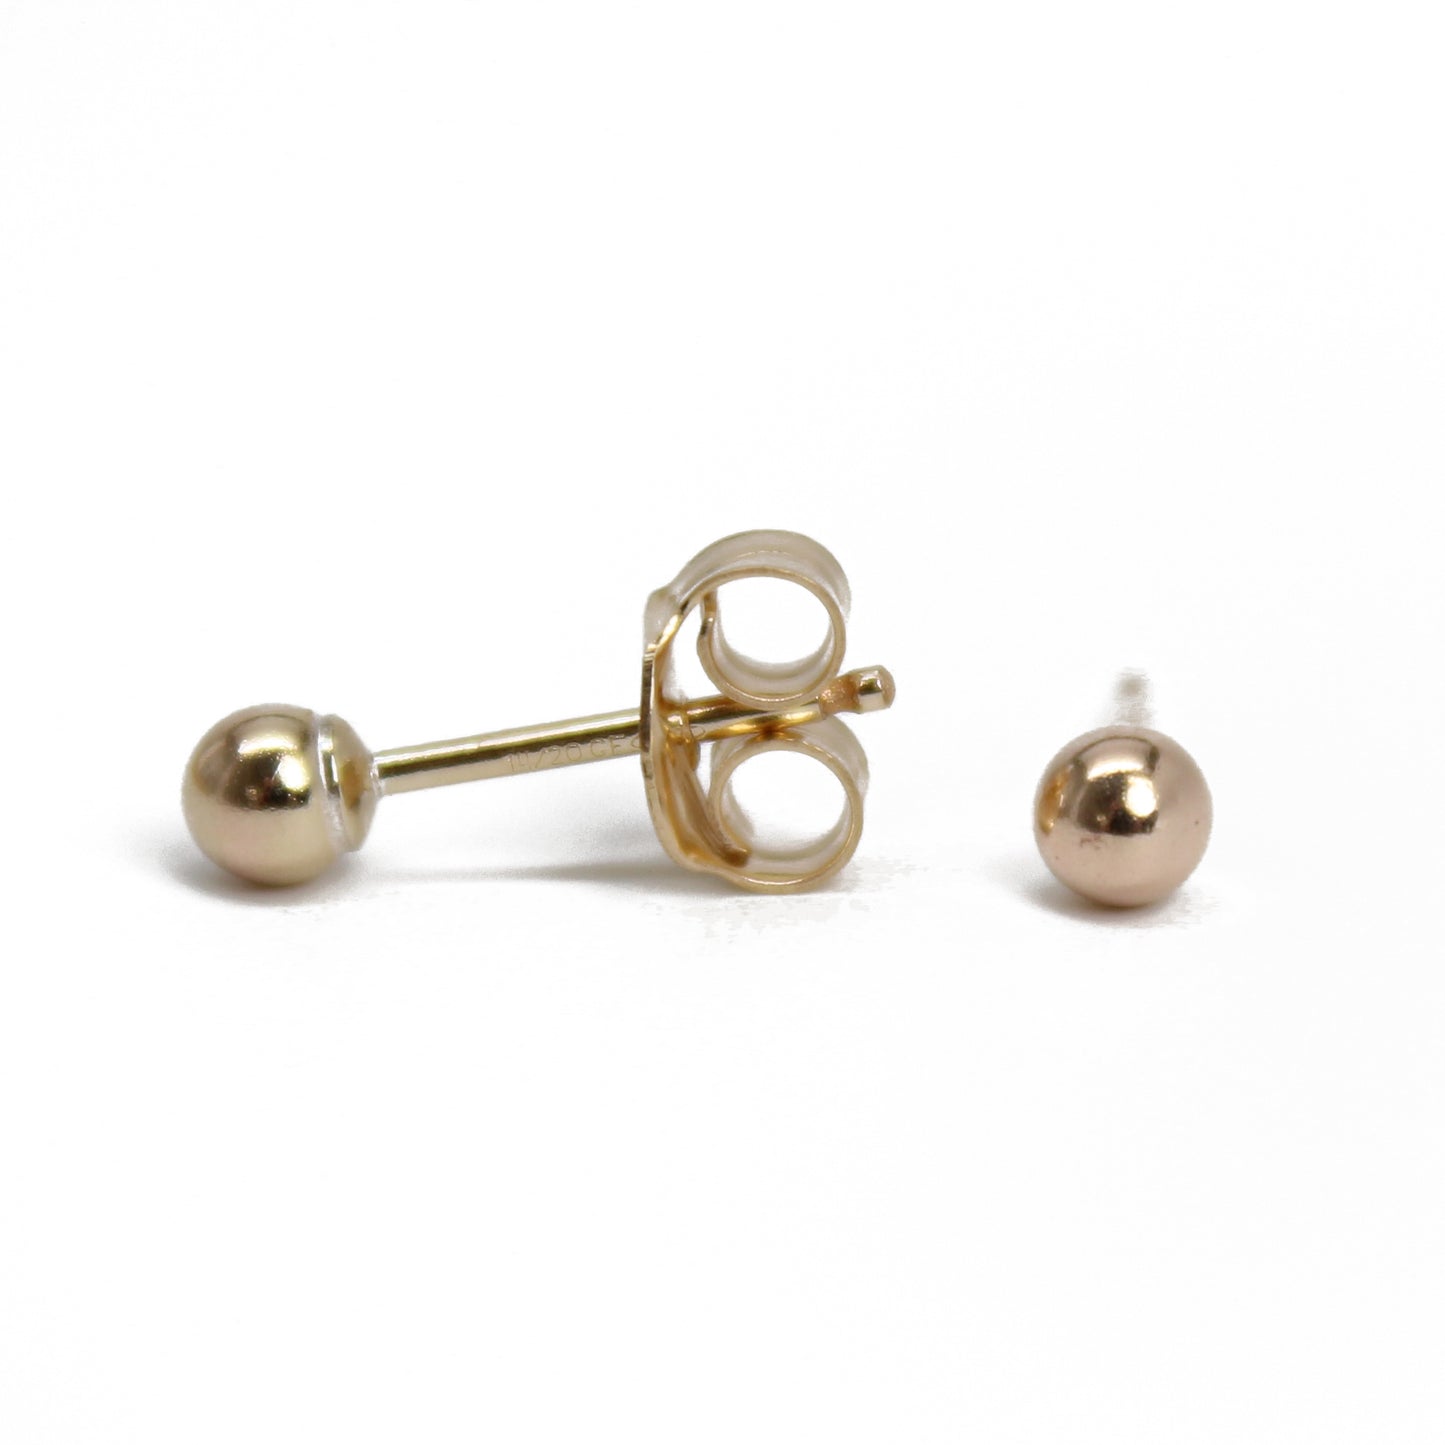 3mm Yellow Gold-Filled Ball Stud Earrings